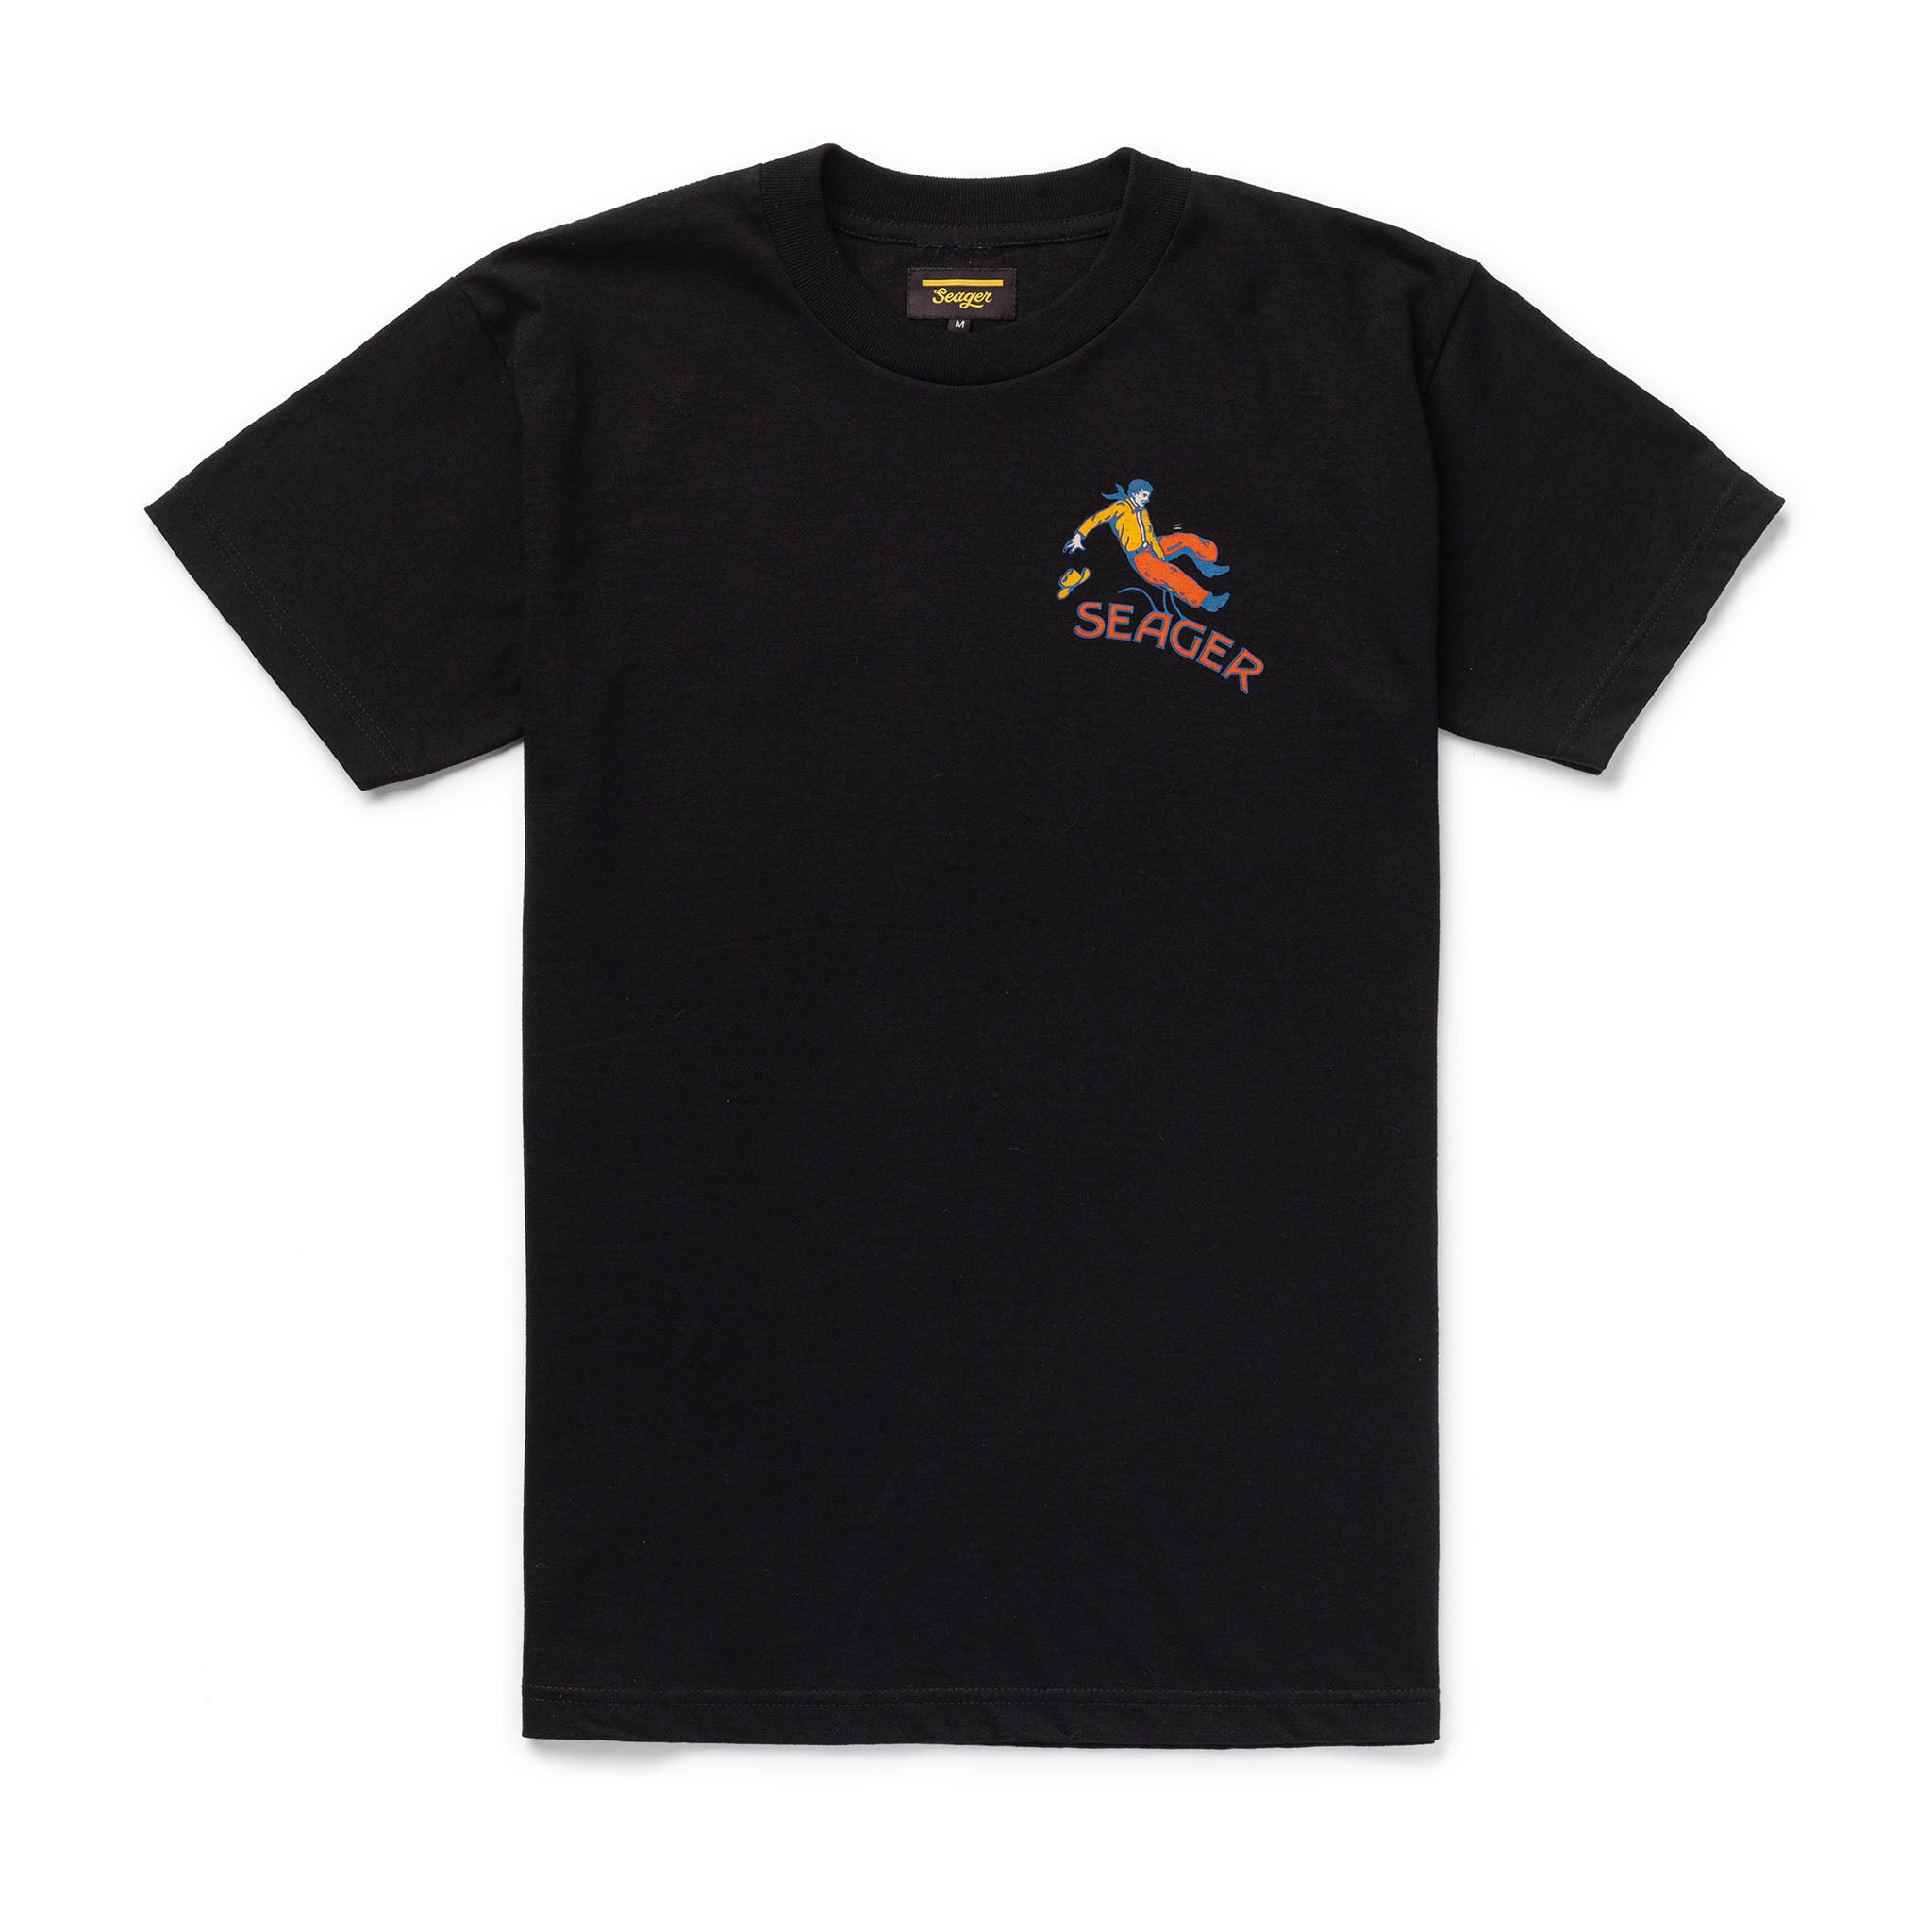 Seager Rodeo Heavyweight Tee Black